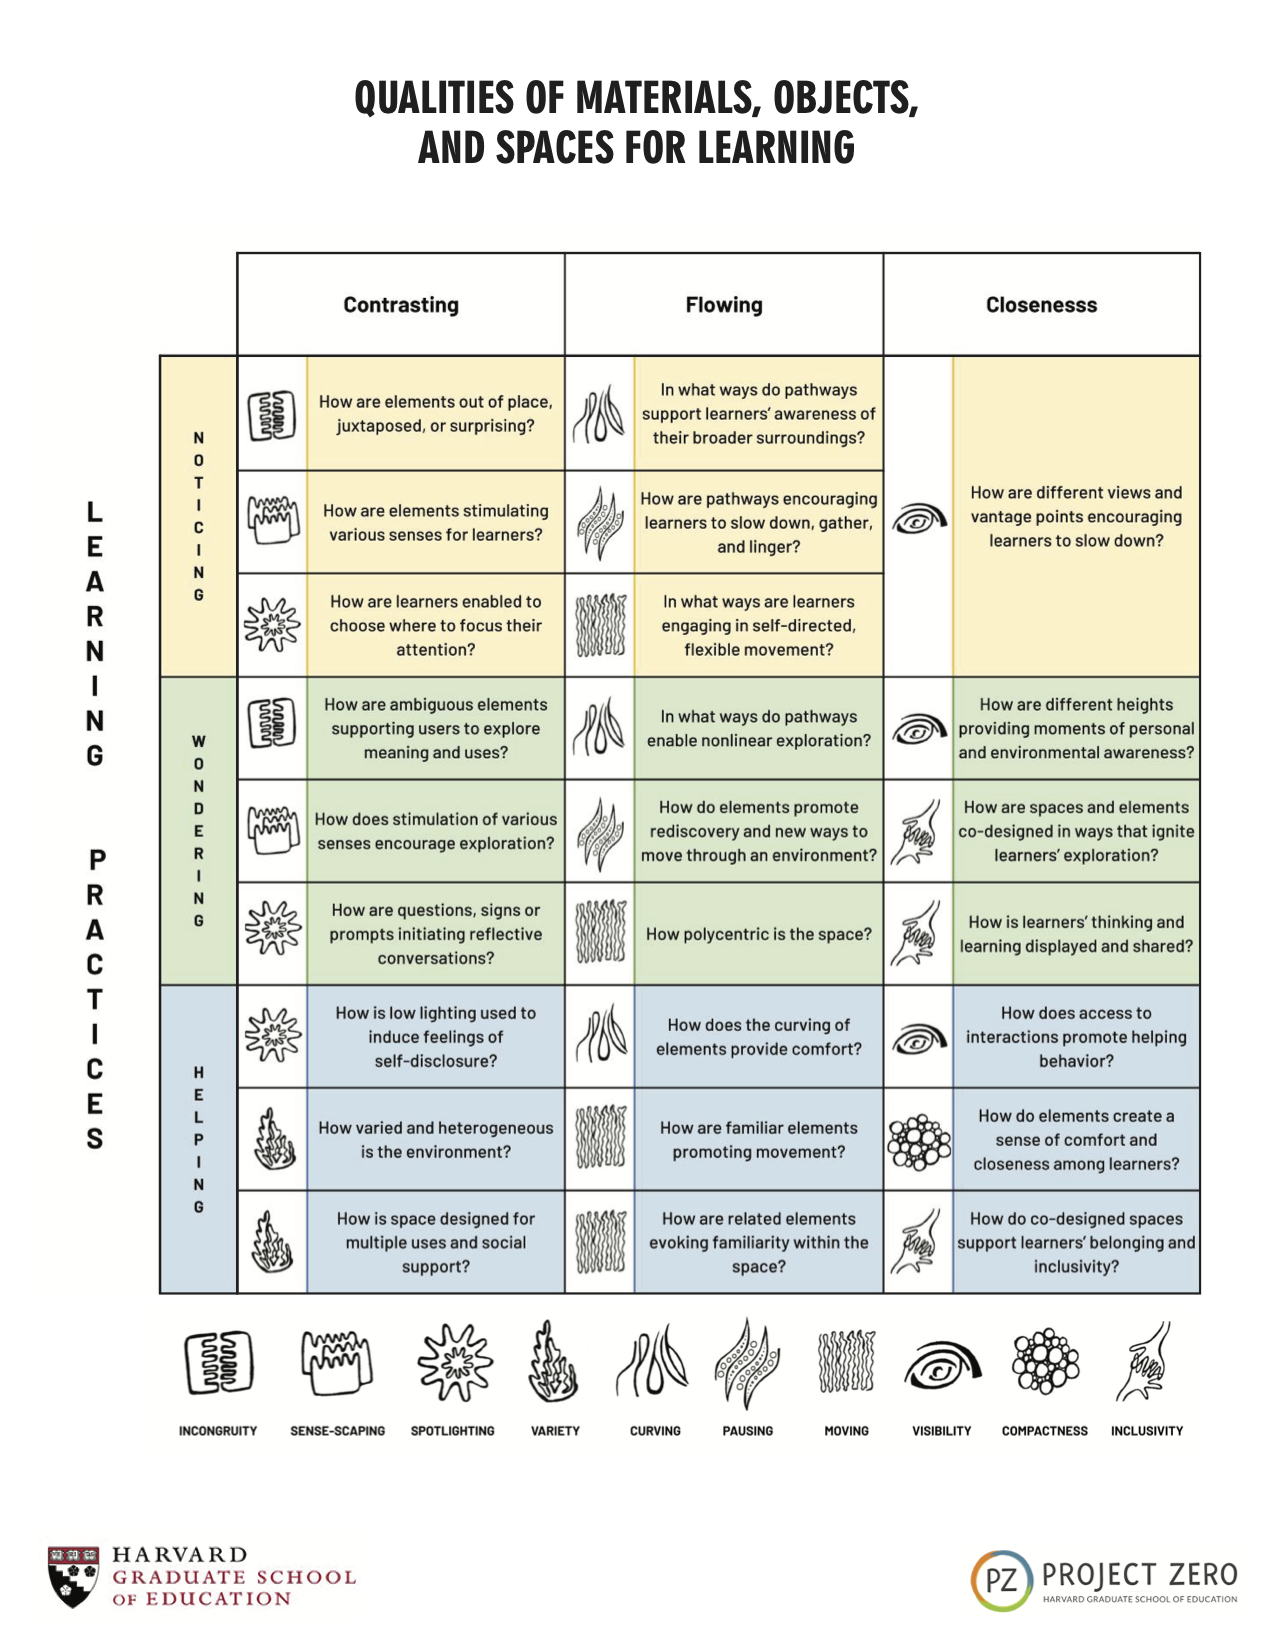 toolkit for qualities of spaces for learning